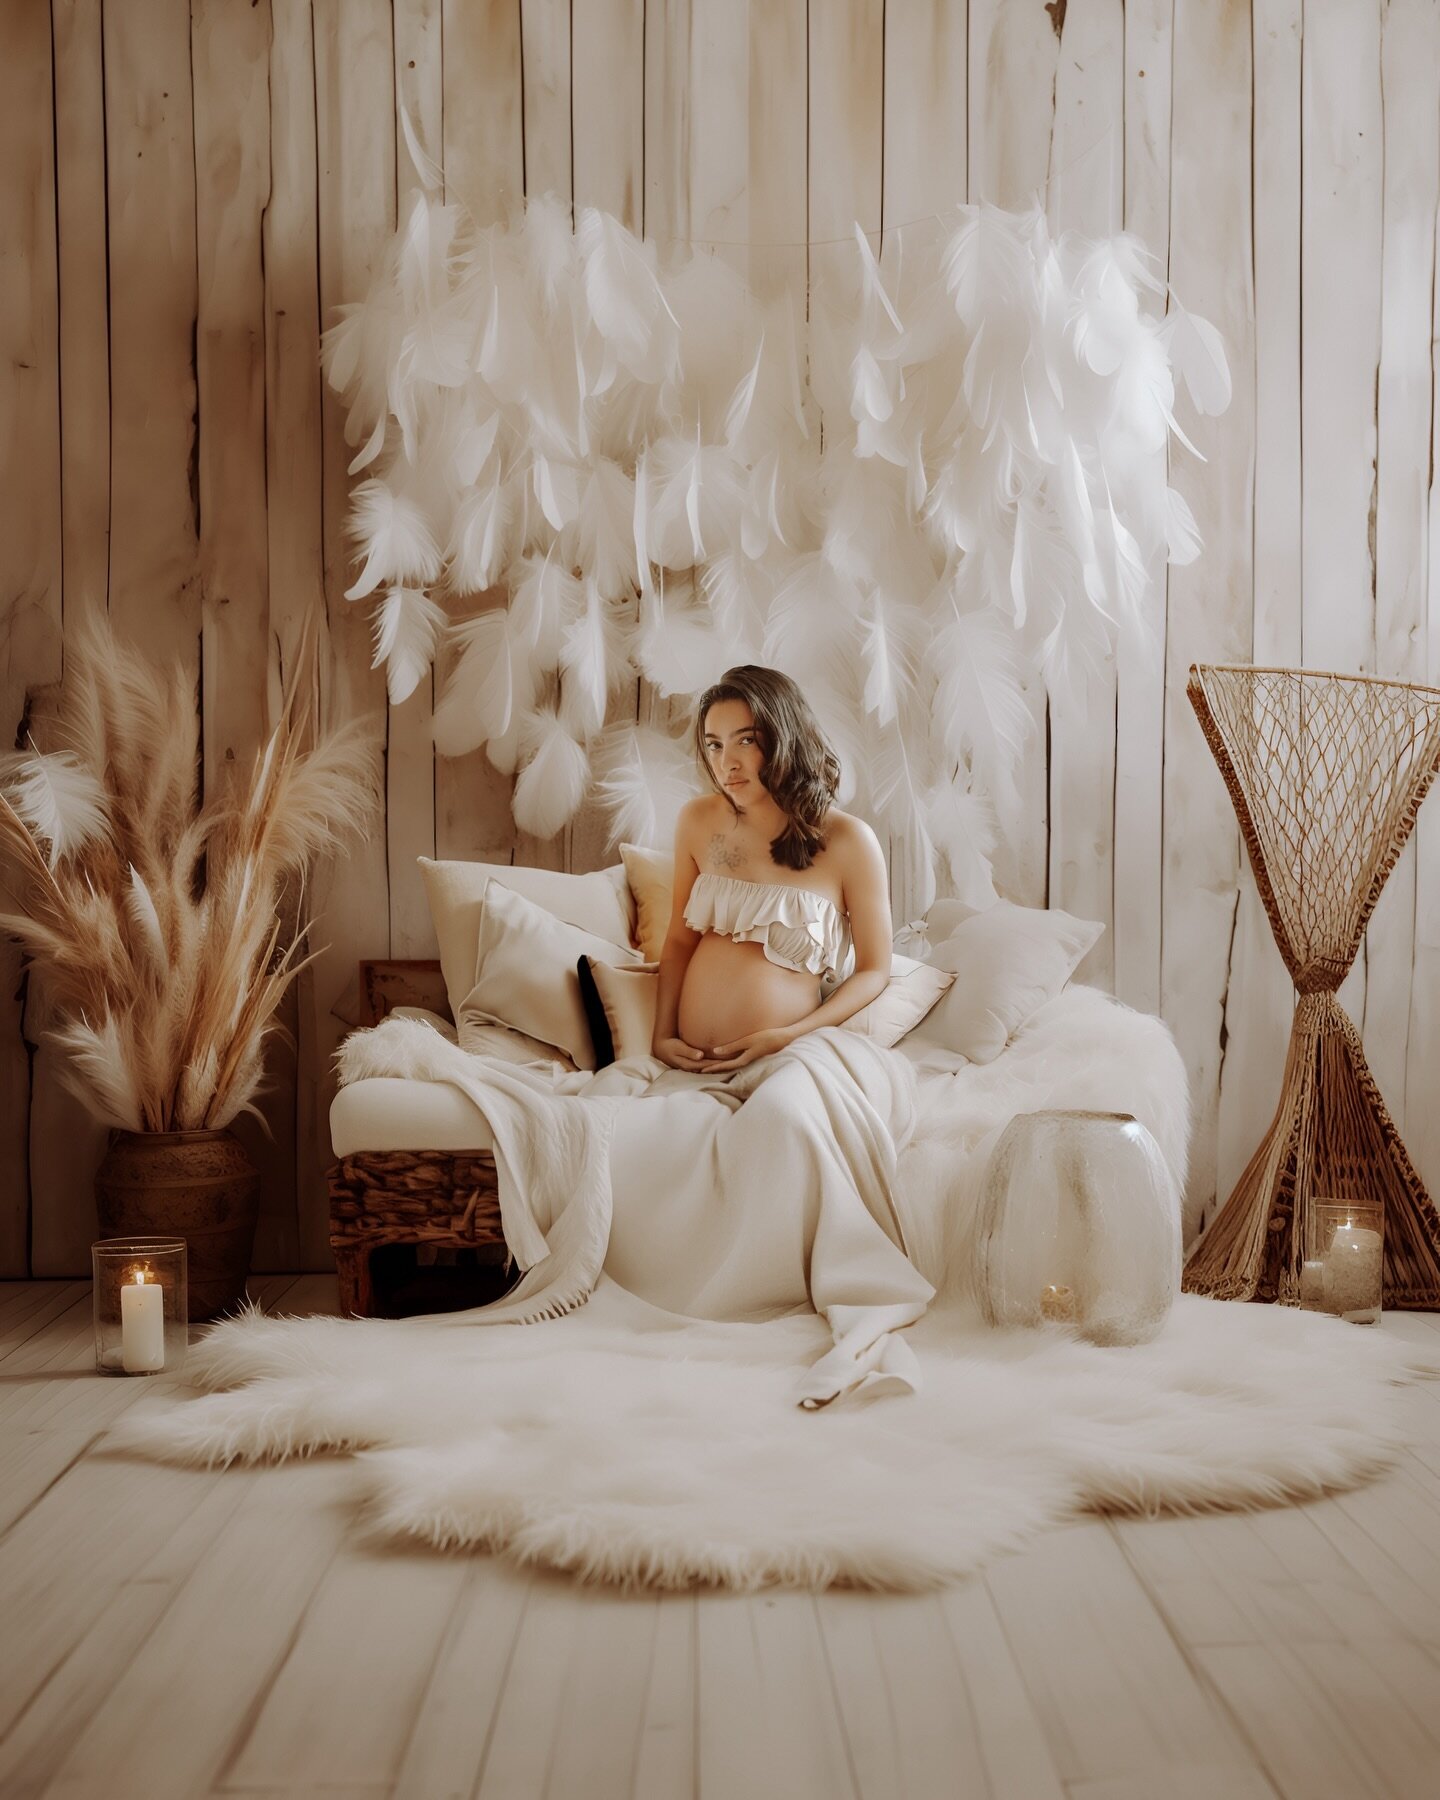 I&rsquo;ll say I&rsquo;m grateful for cmc teaching compositing and lighting when such background conditions don&rsquo;t match your vision, and you need to work around how beautiful your model looks. Here is a maternity shoot with my beautiful sister.